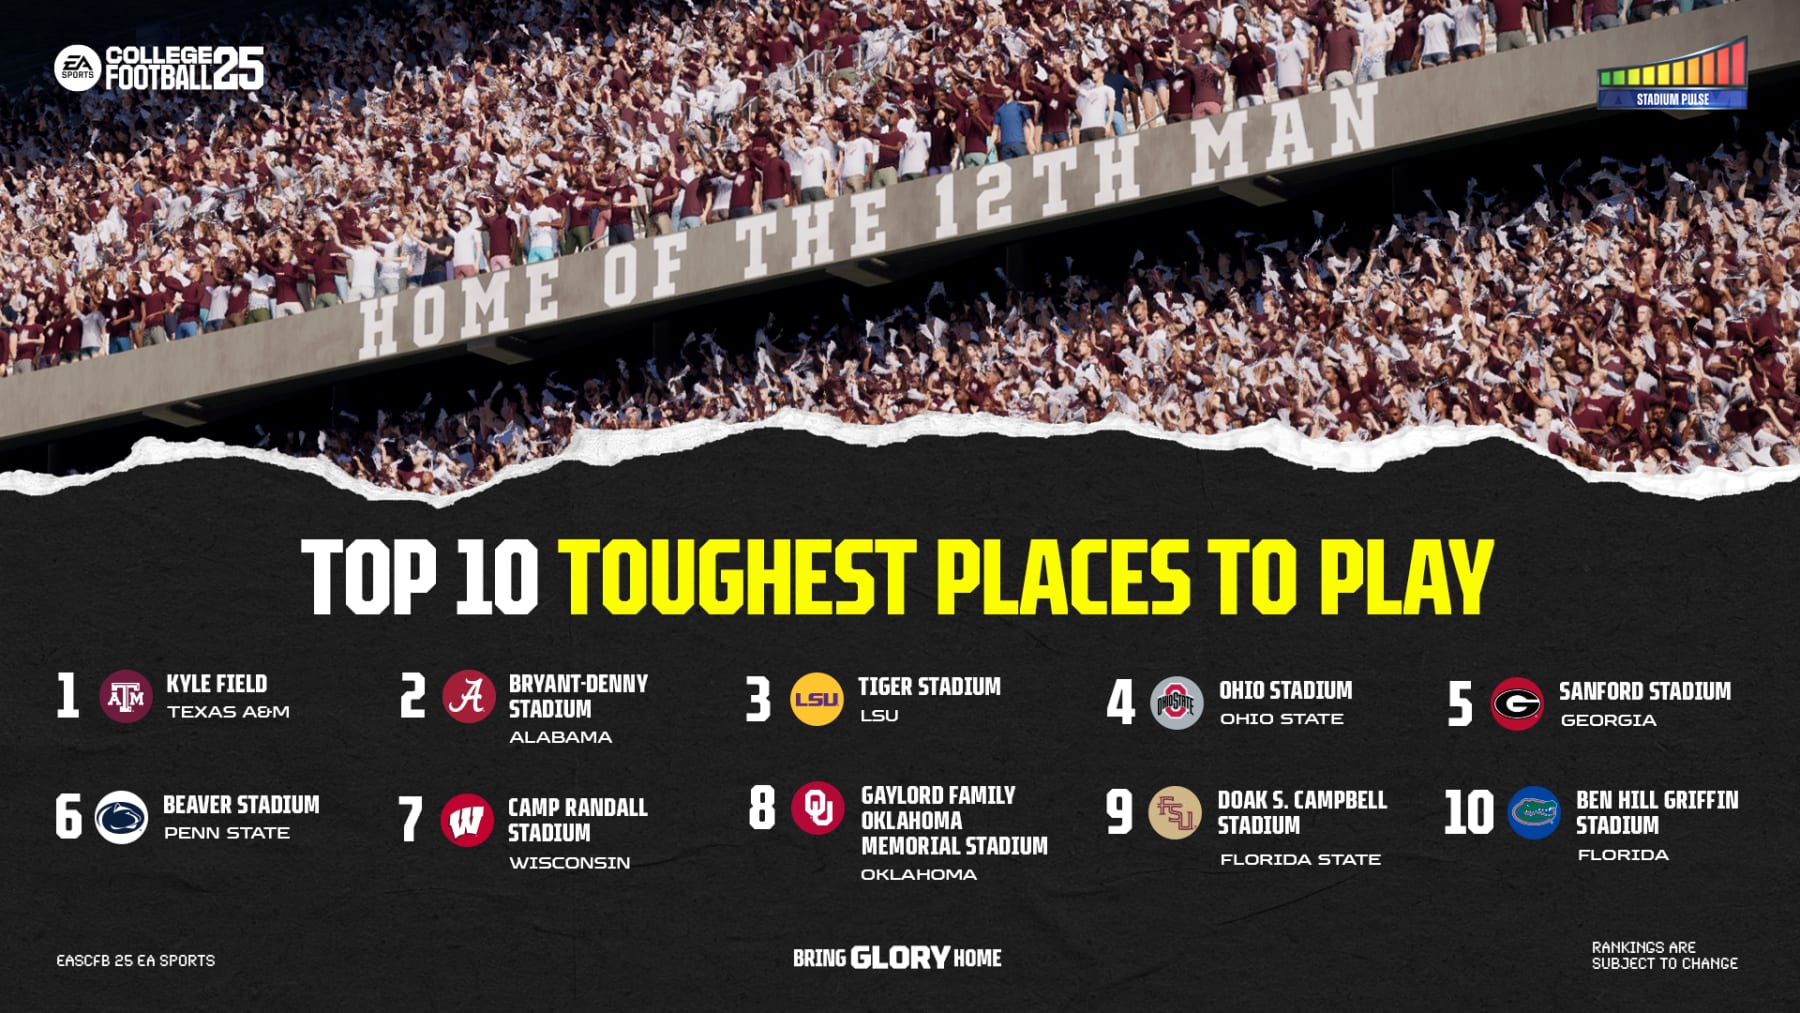 Texas A&M and Alabama top ‘toughest places to play’